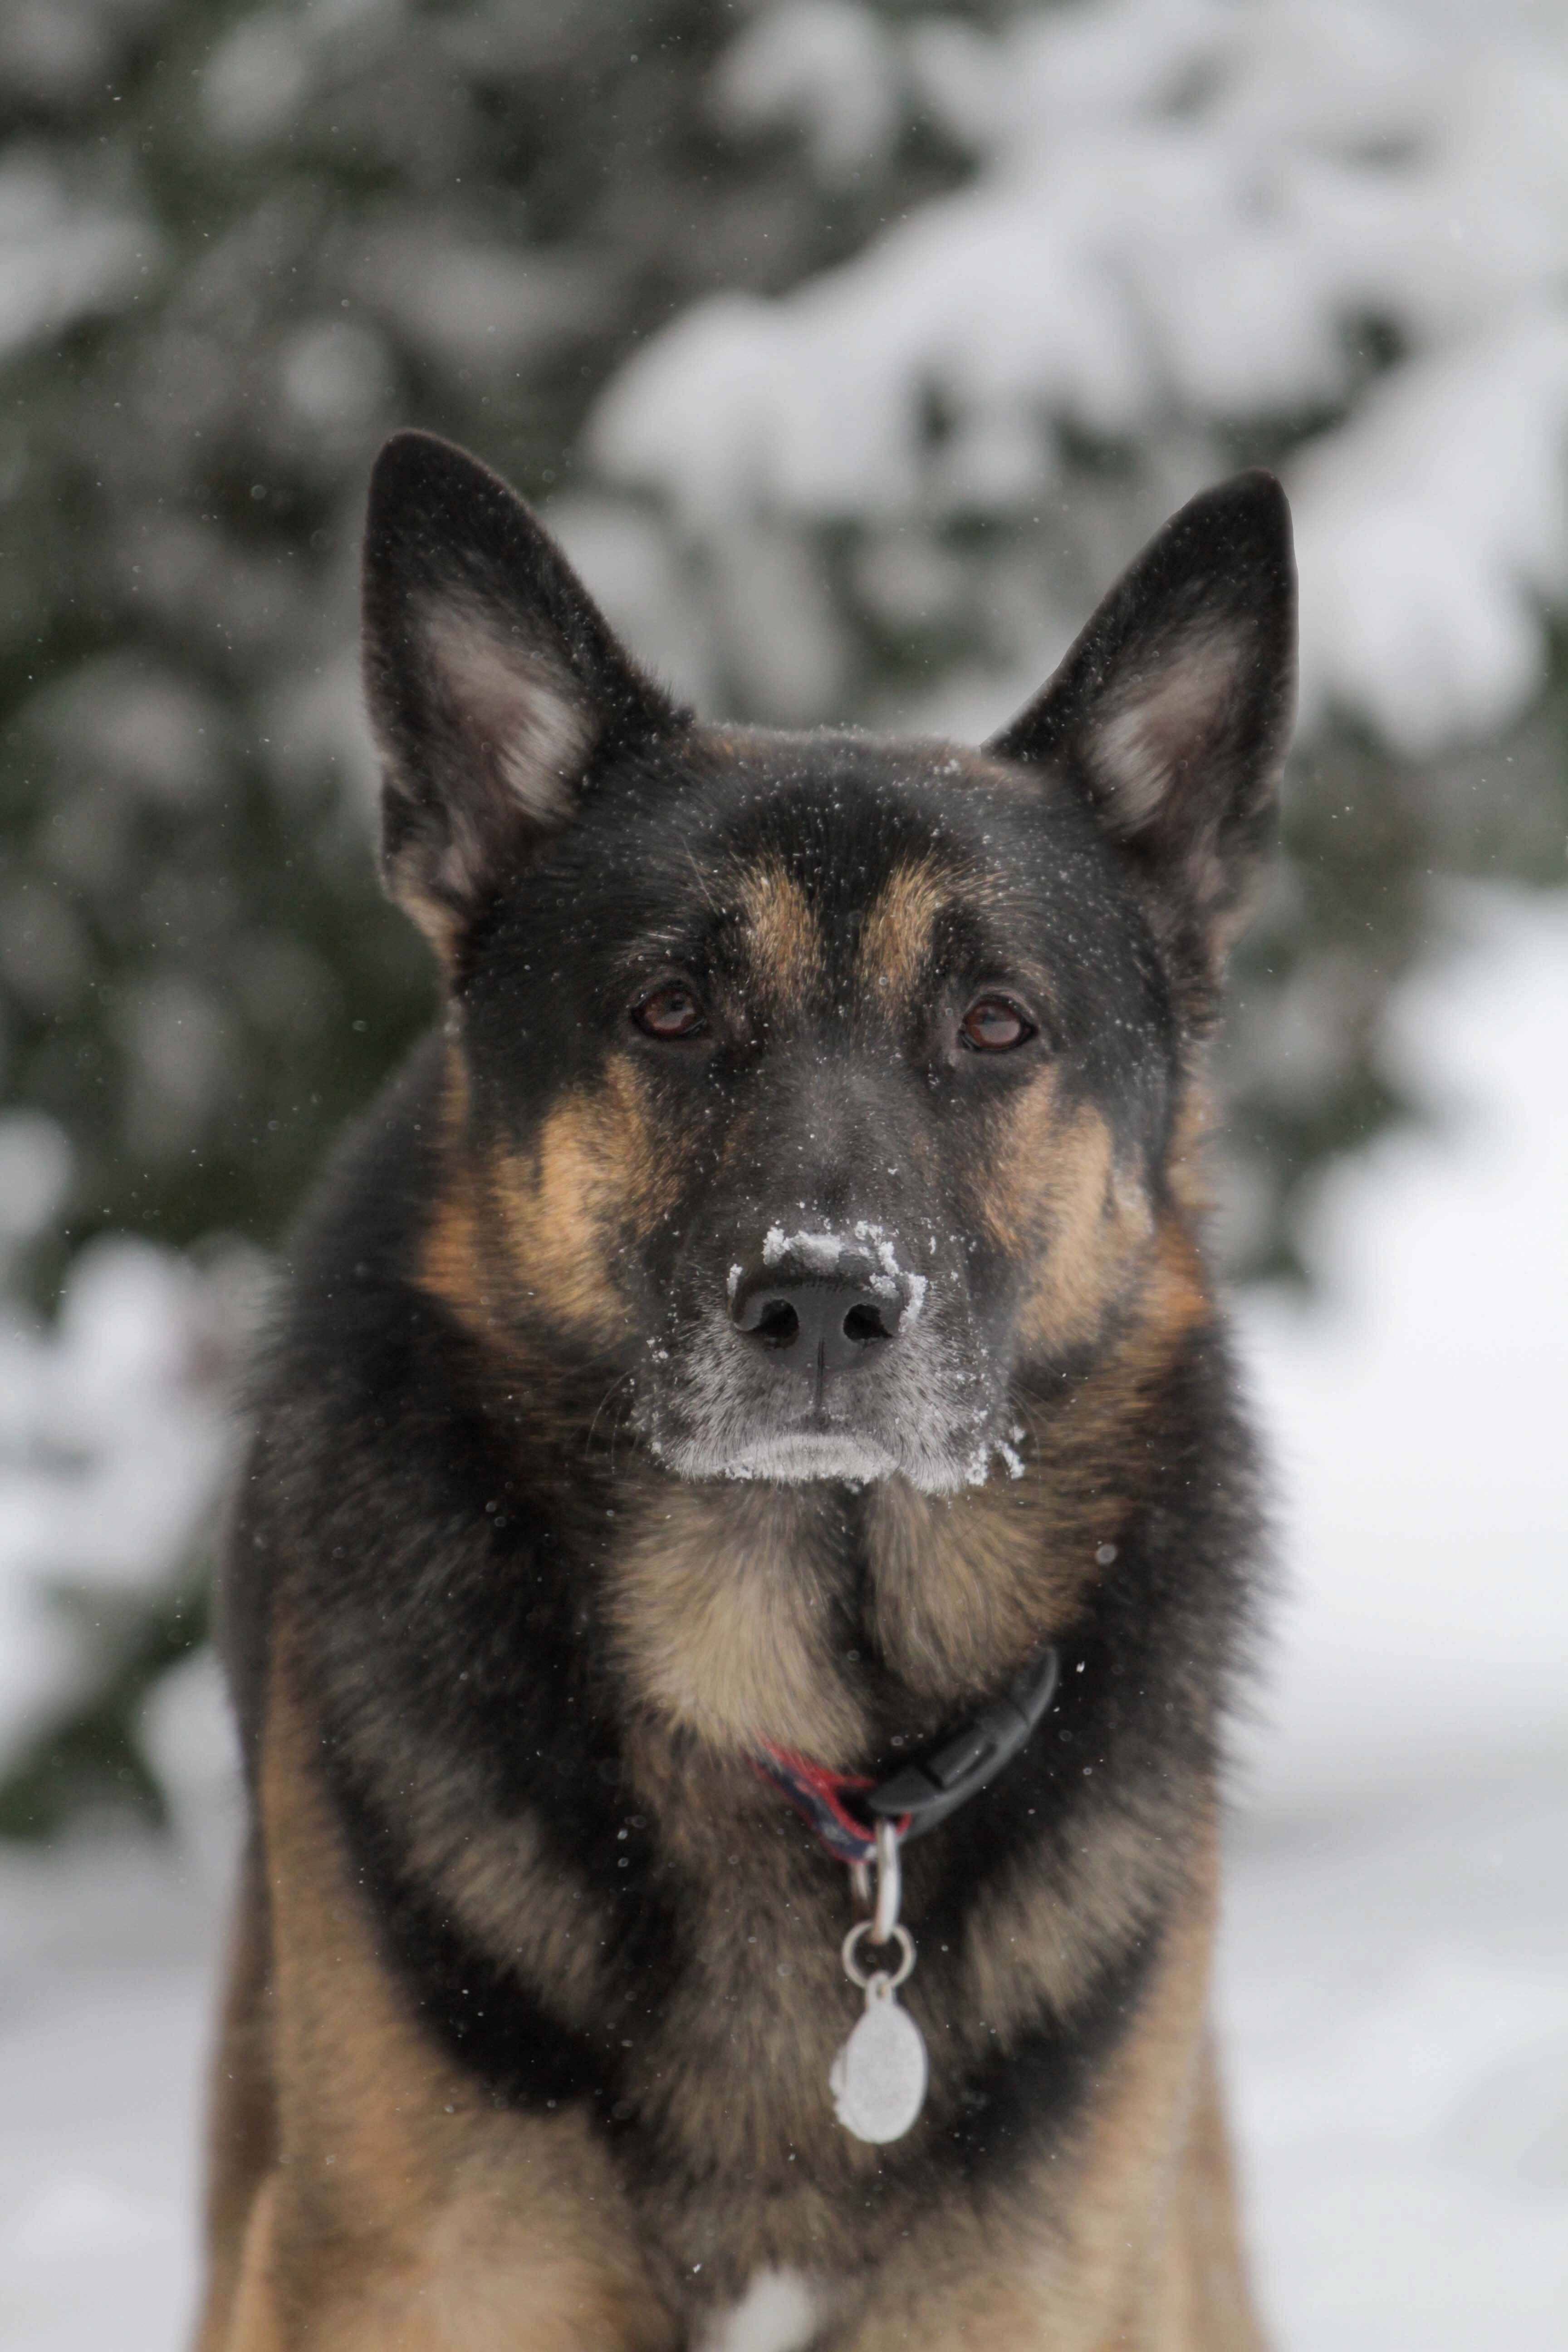 What kind of climate is best suited for a German shepherd?